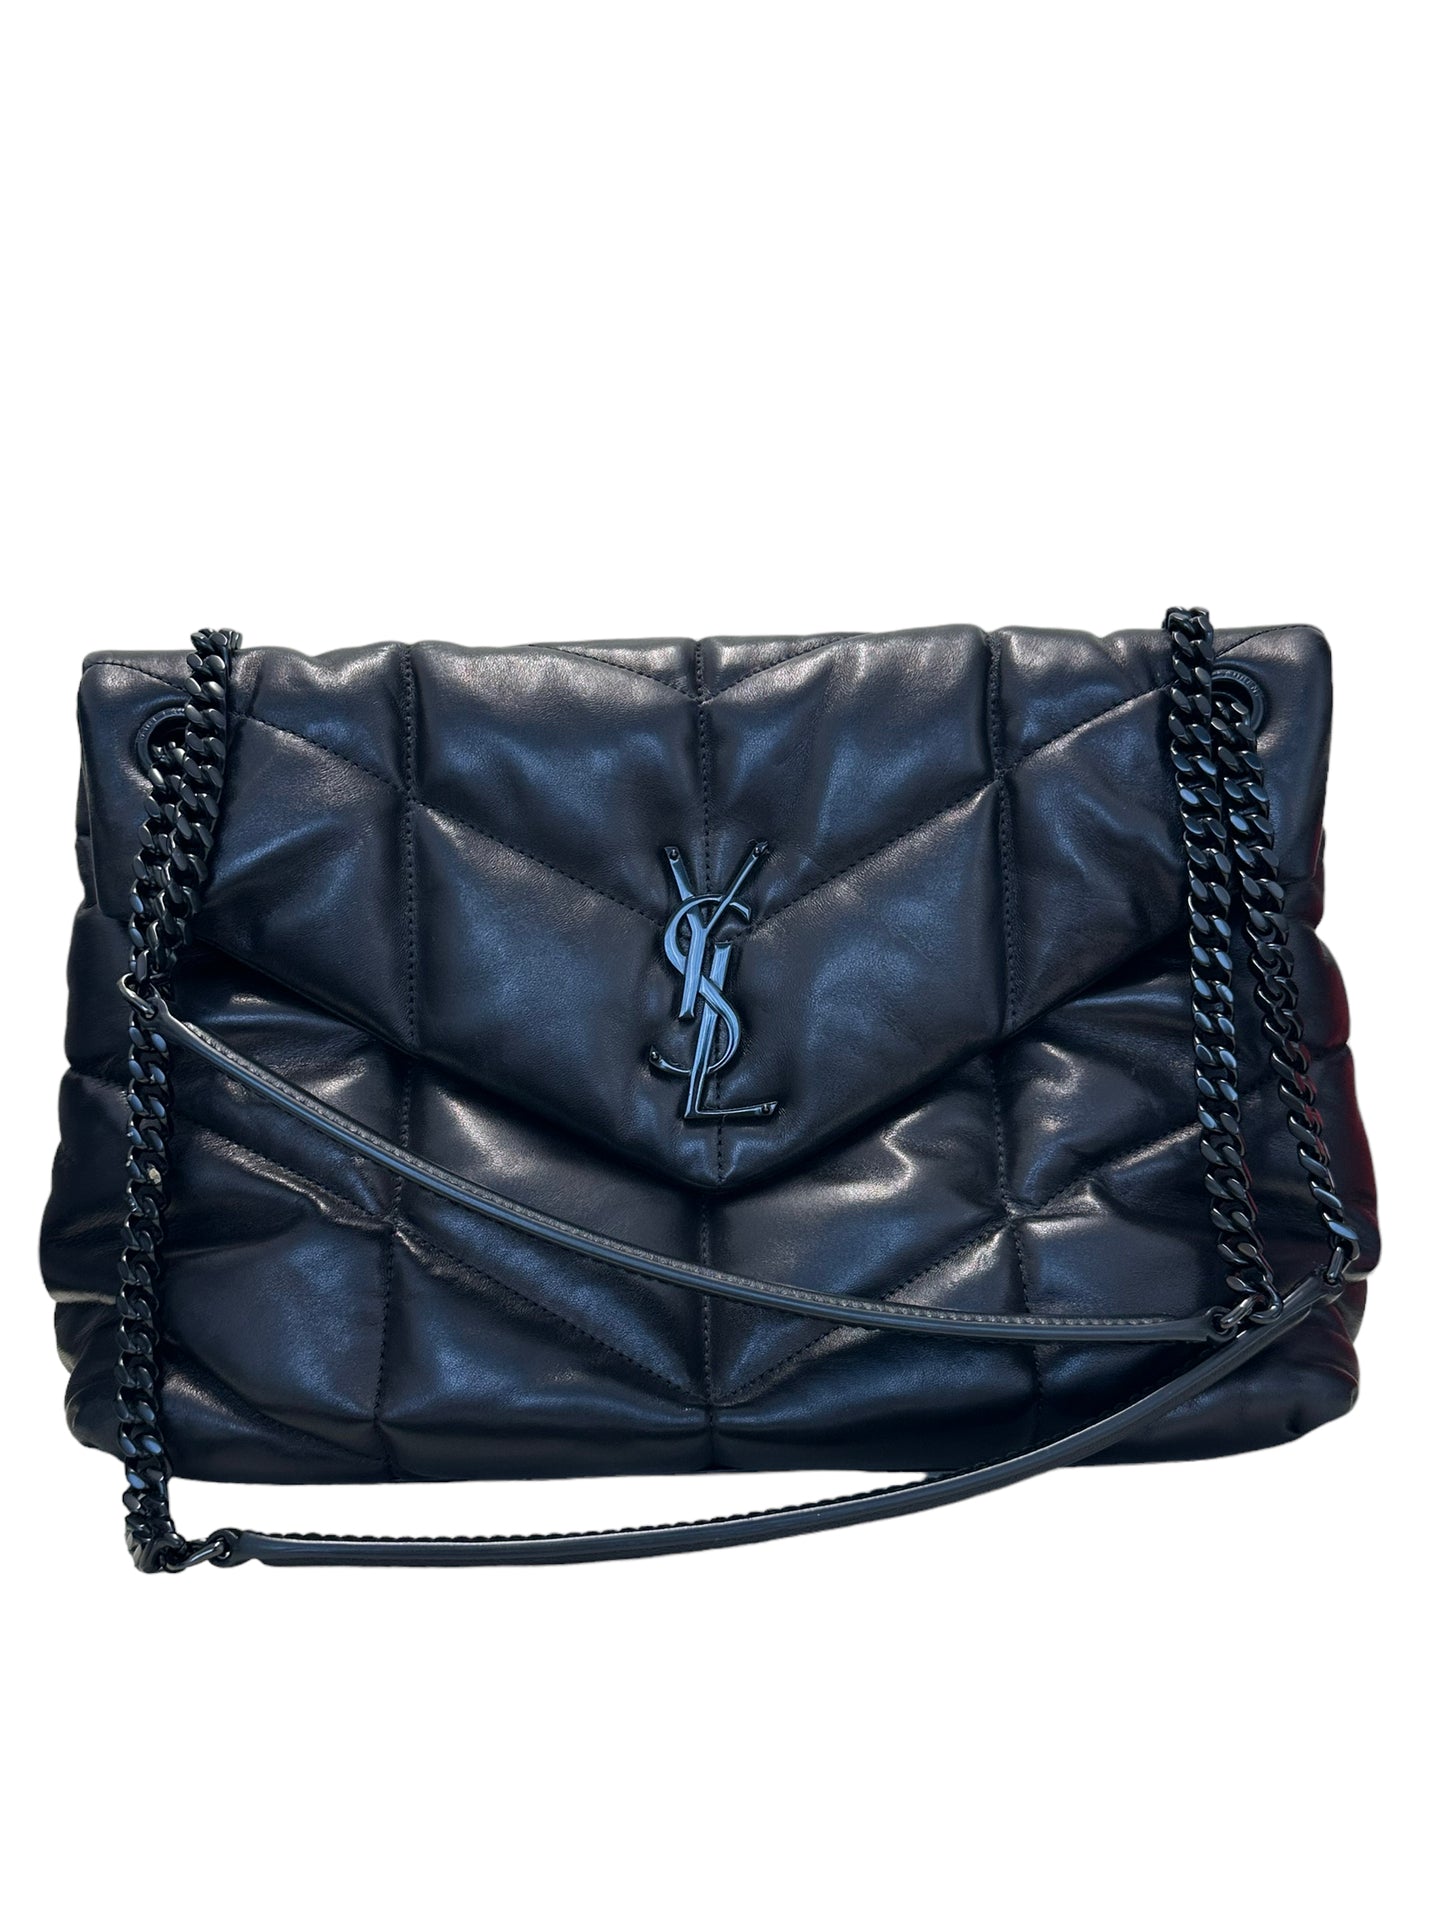 SAINT LAURENT - Black Quilted Leather Medium Loulou Puffer Bag